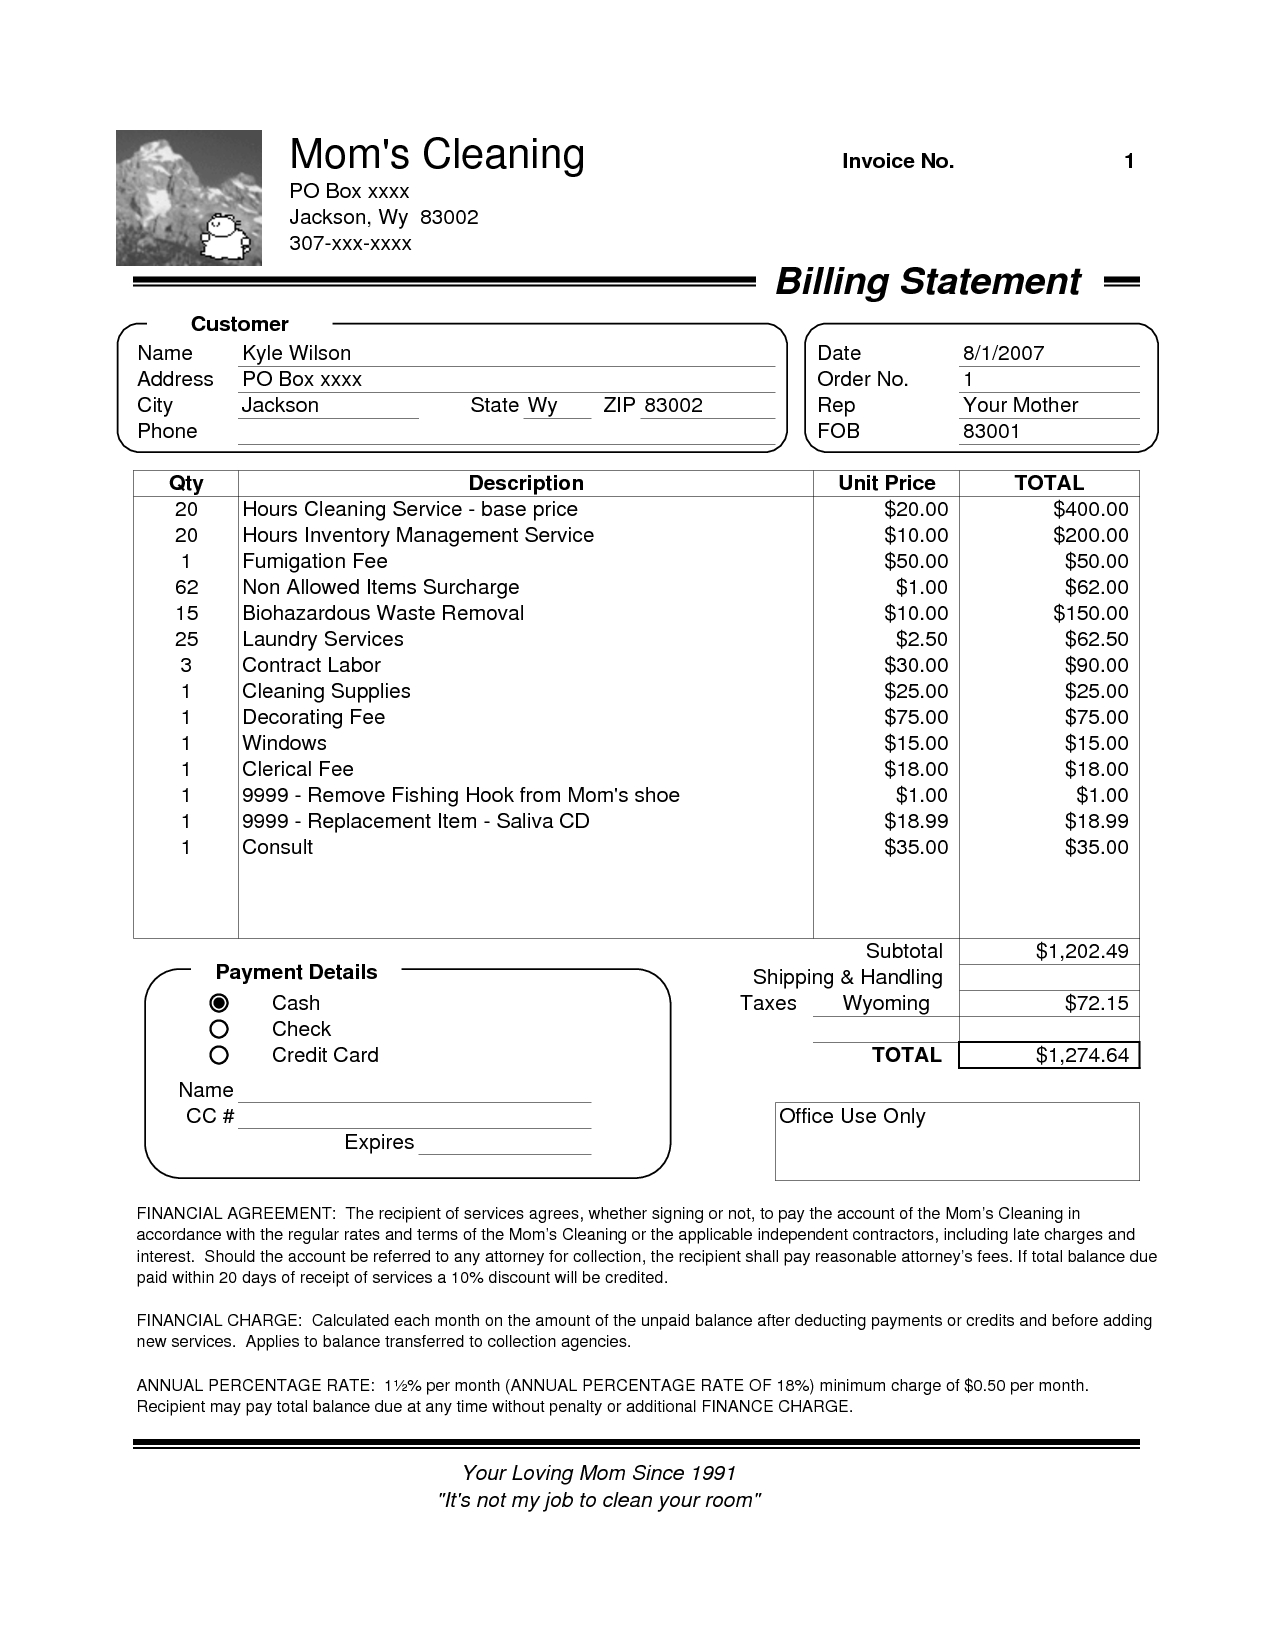 cleaning service invoice template photo cleaning service contract example images 1275 X 1650